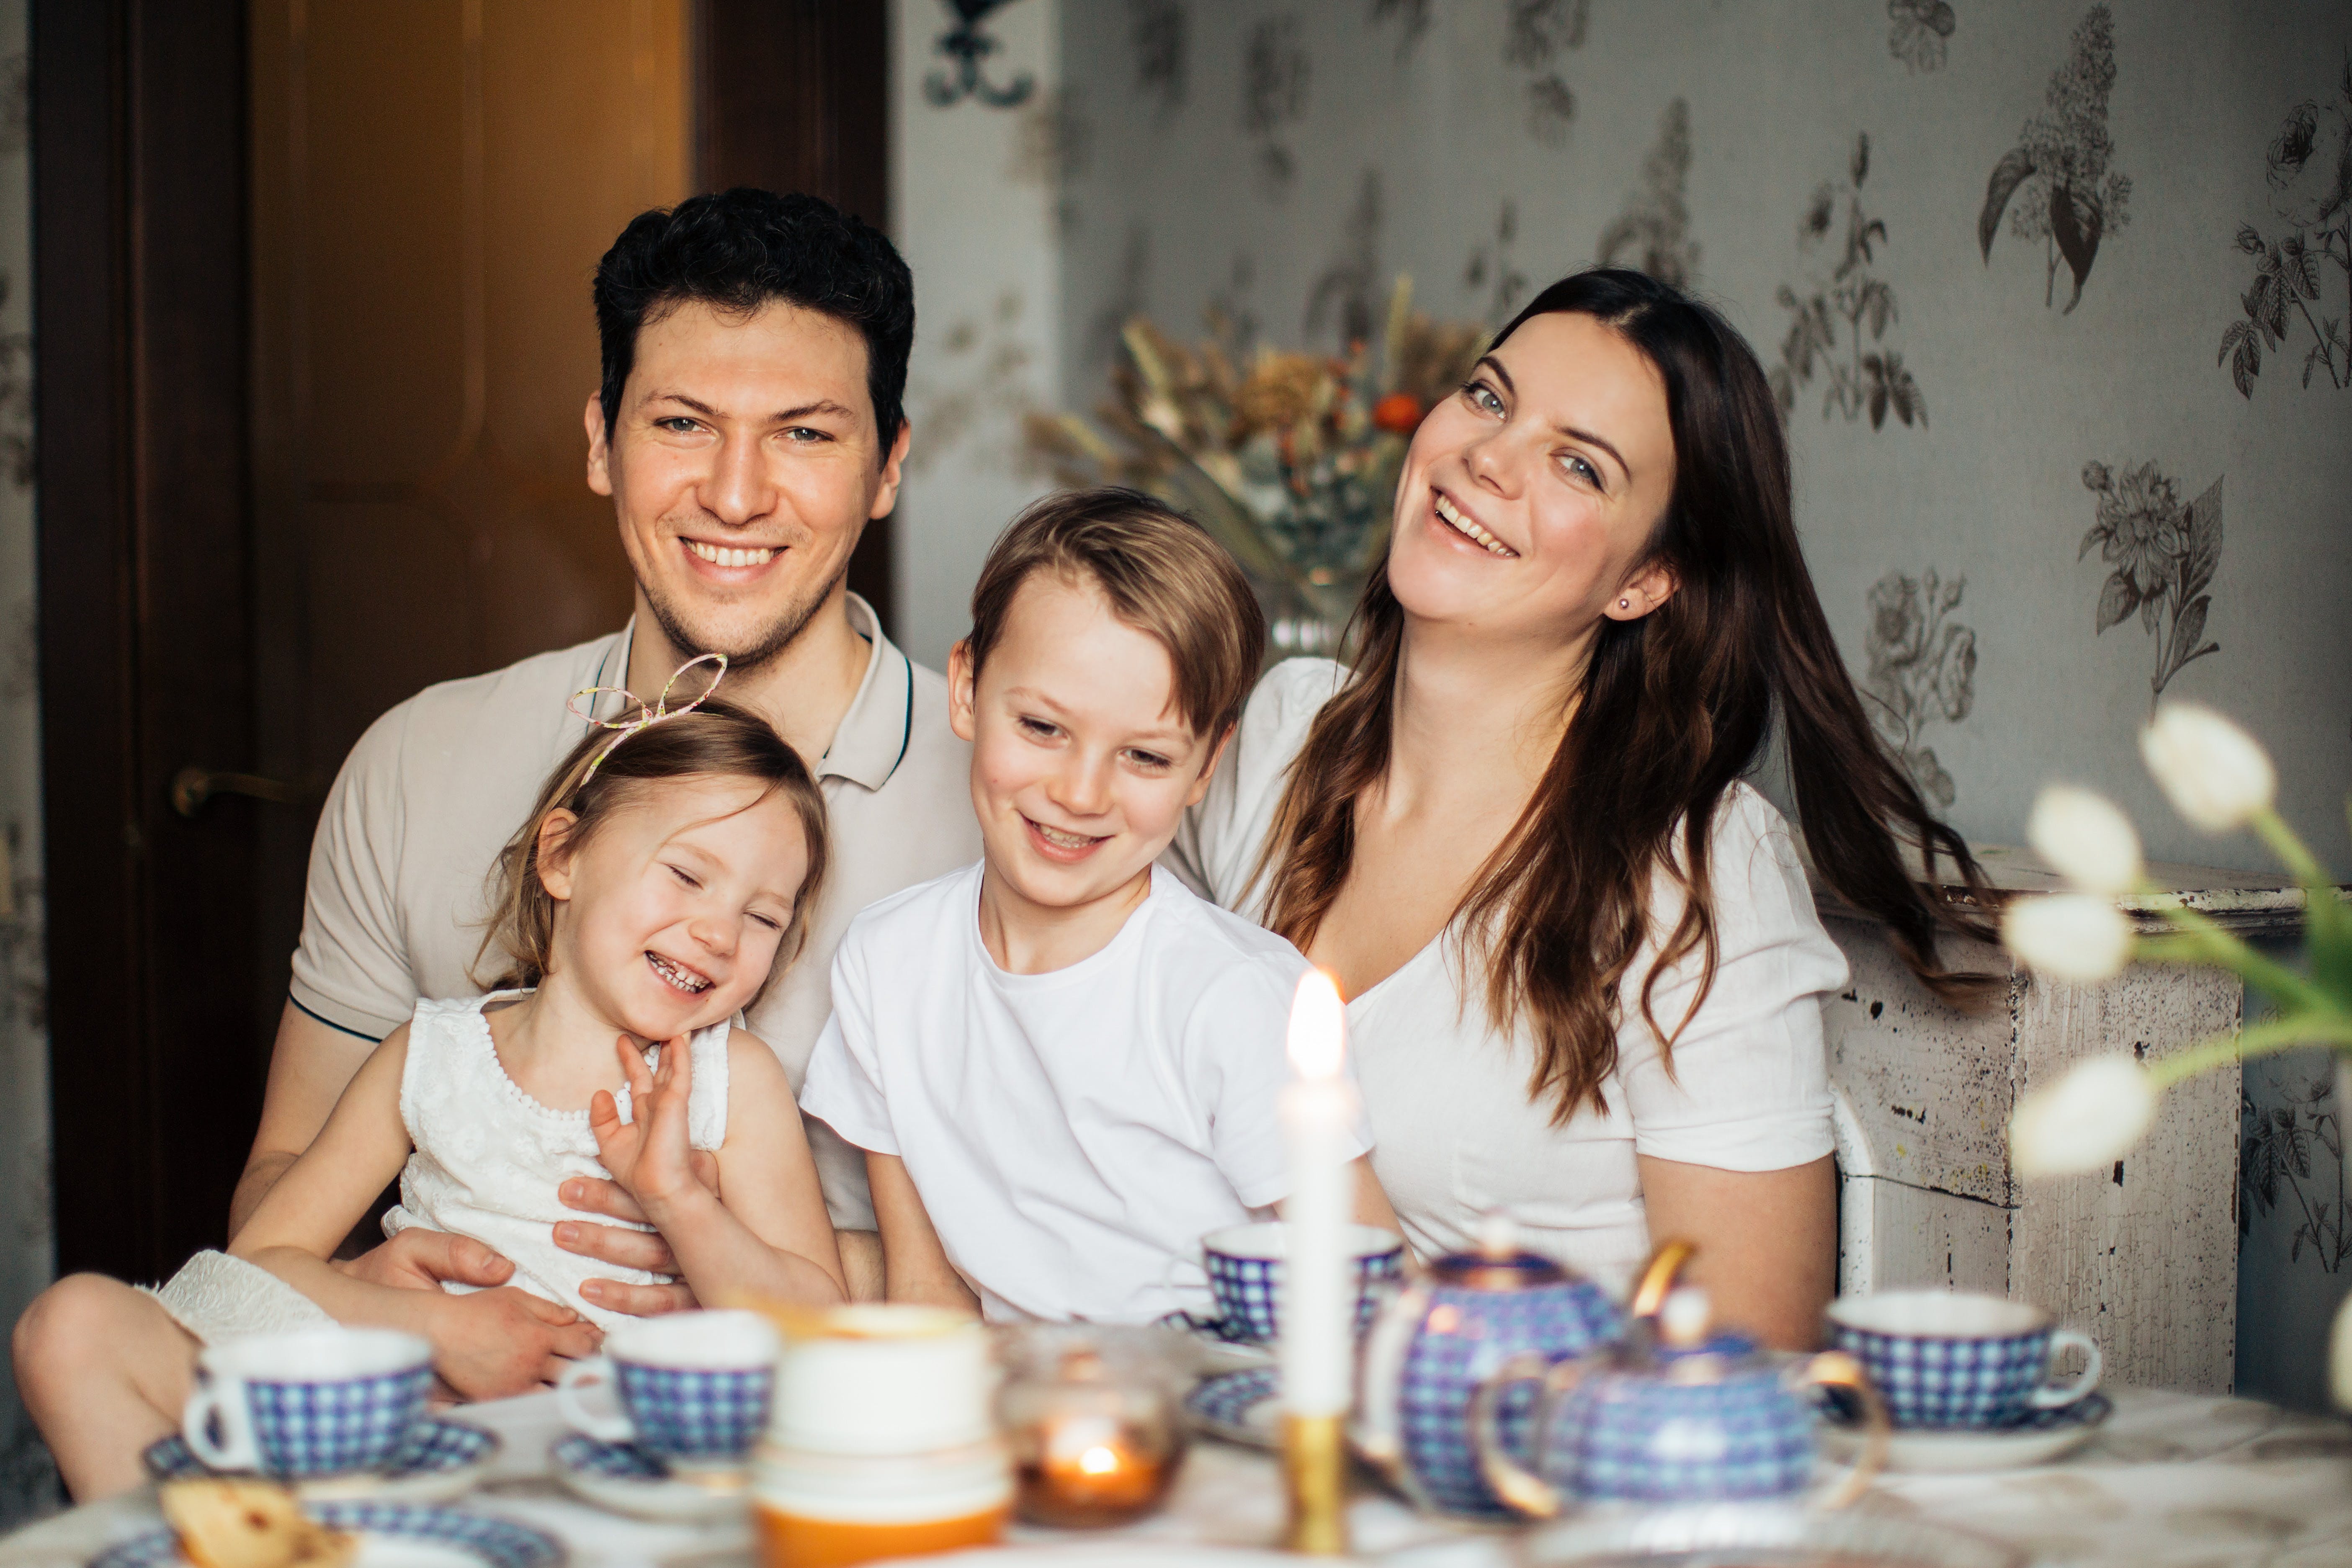 A happy family of four | Source: Pexels